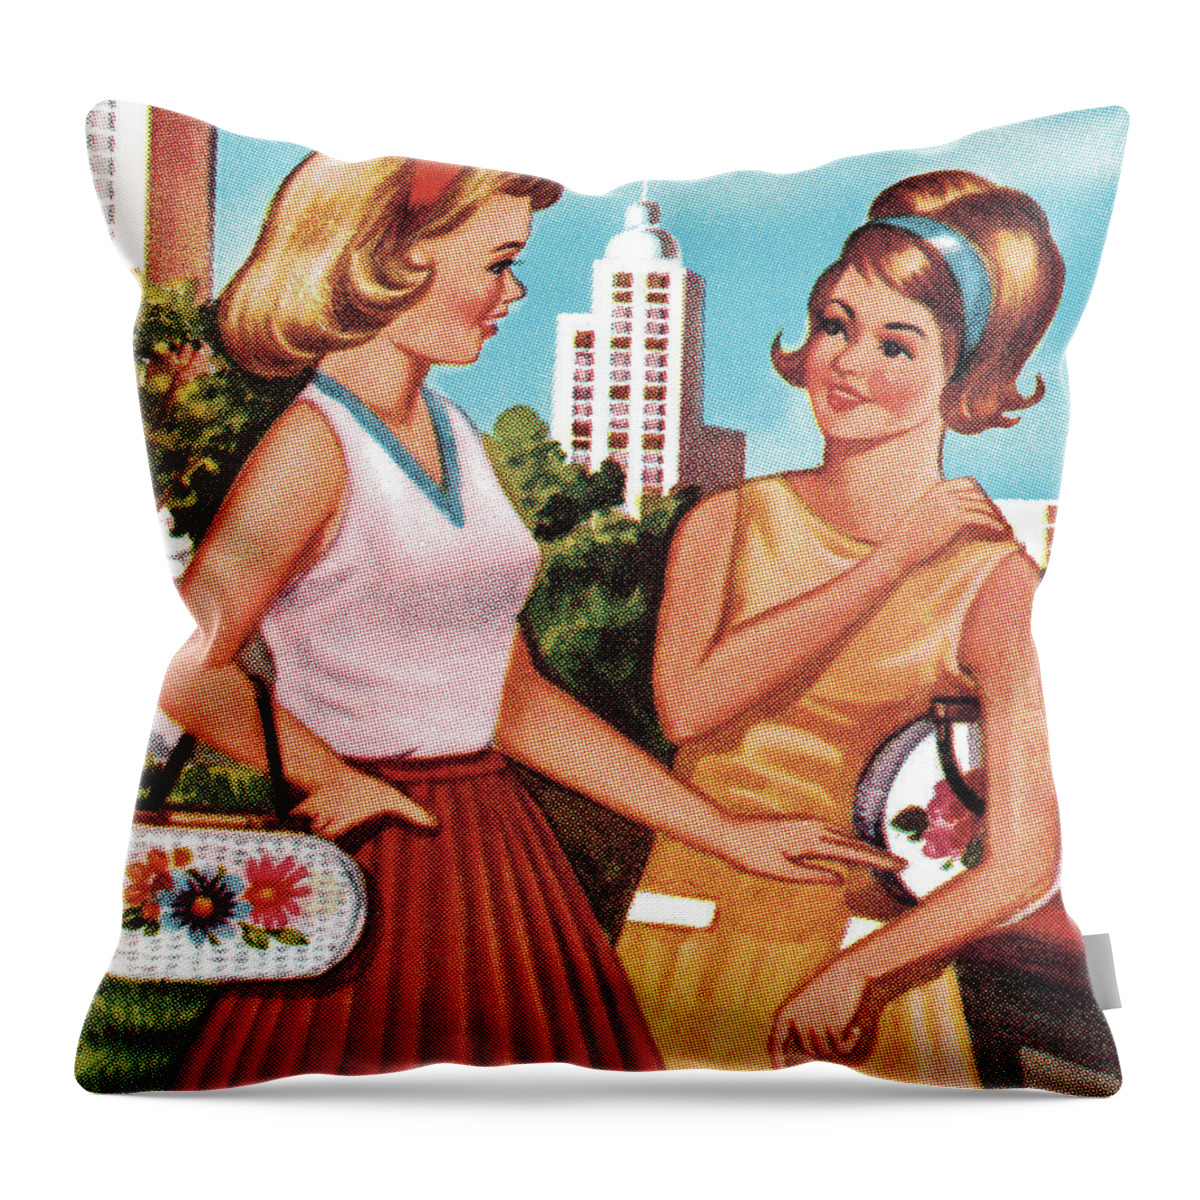 Accessories Throw Pillow featuring the drawing Teenage Girls by CSA Images